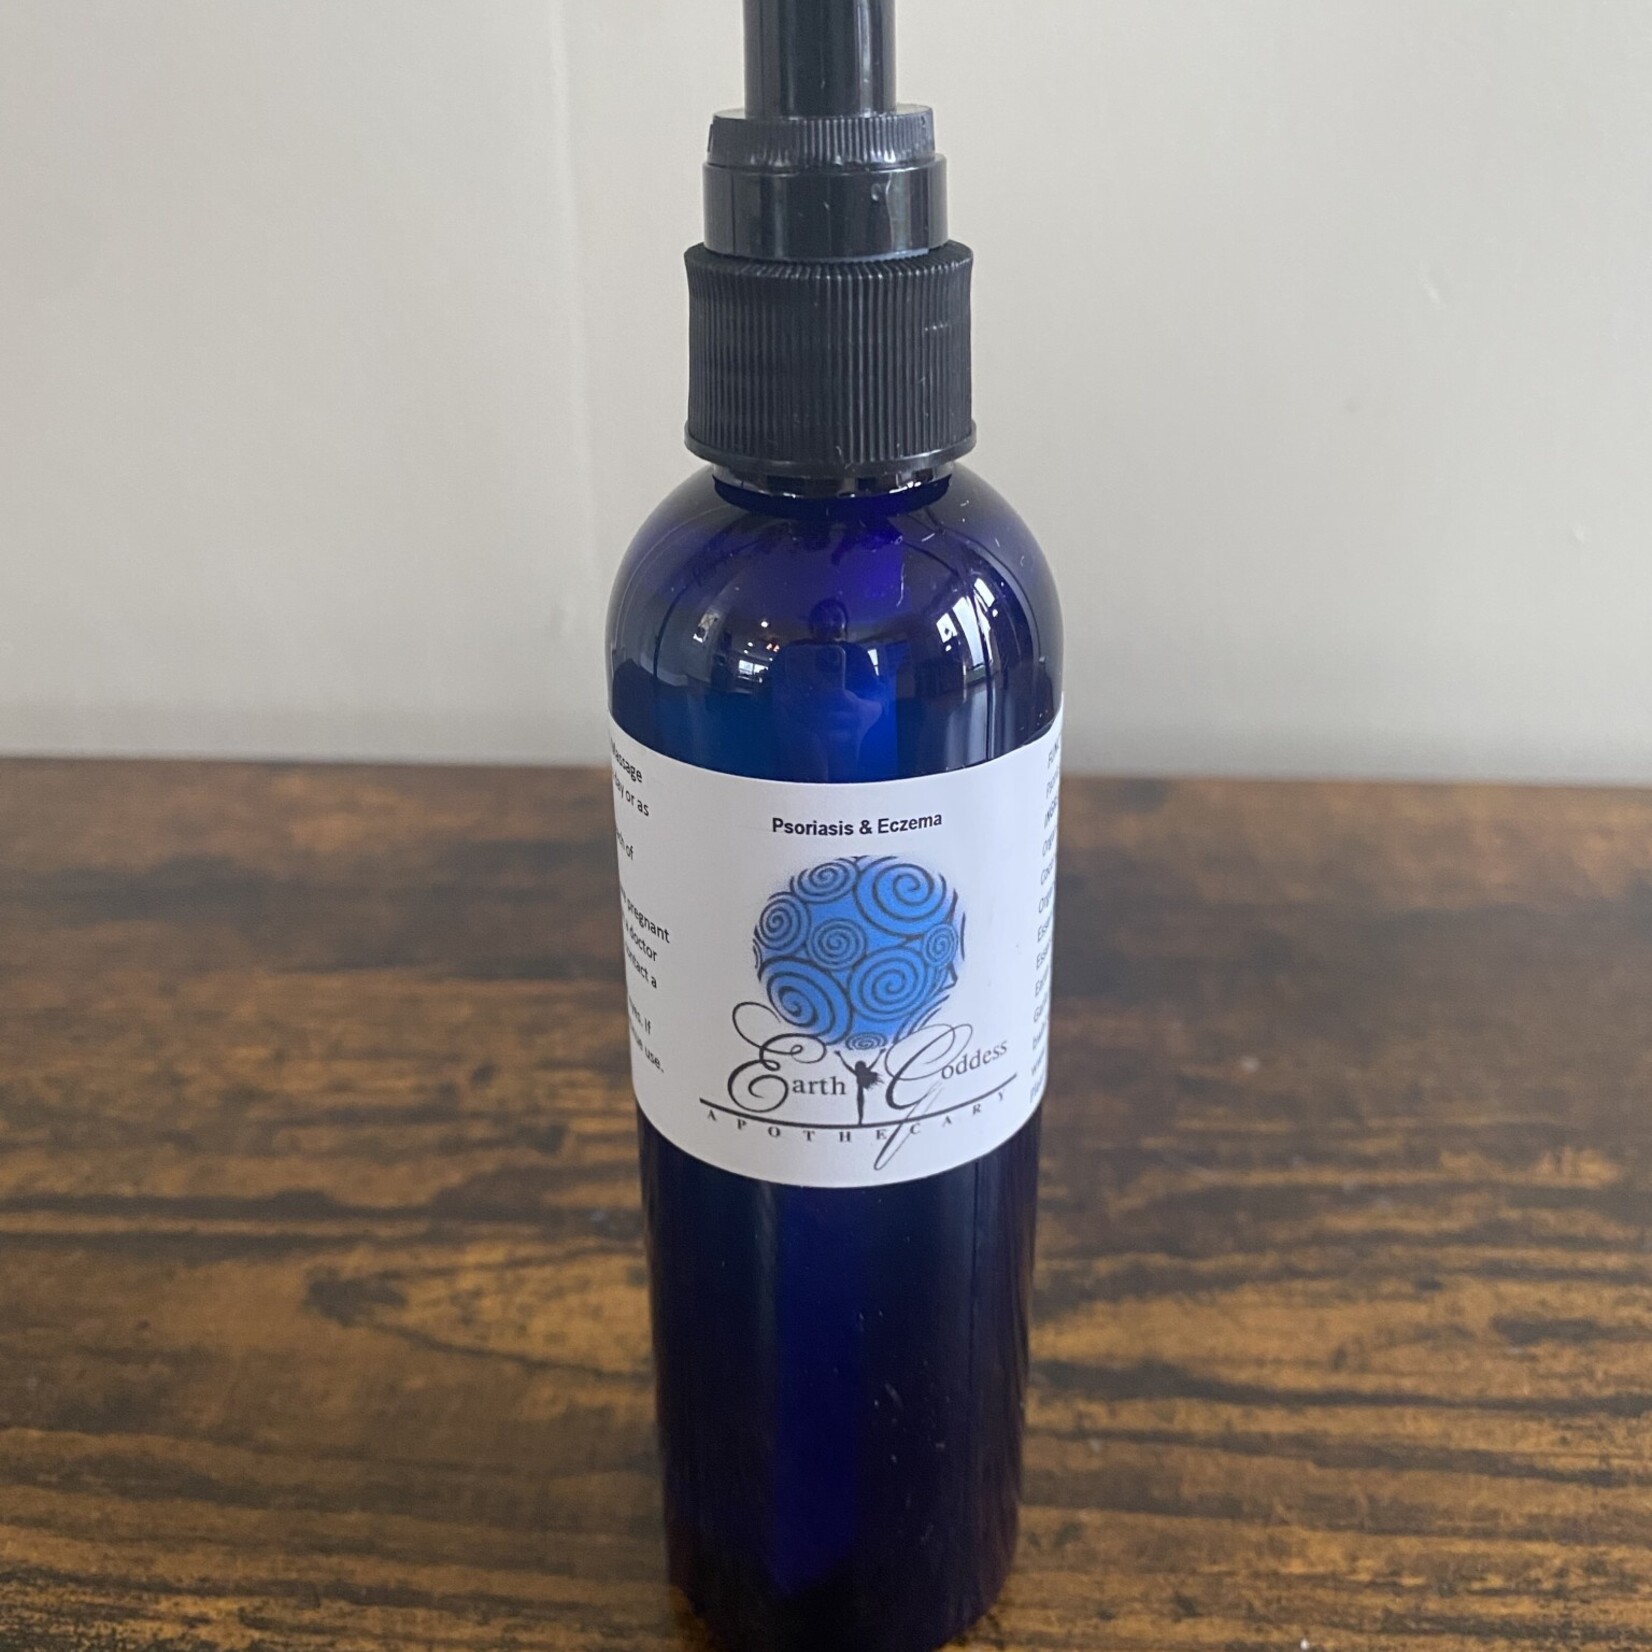 Earth Goddess Apothecary Eczema & Psoriasis Support Oil